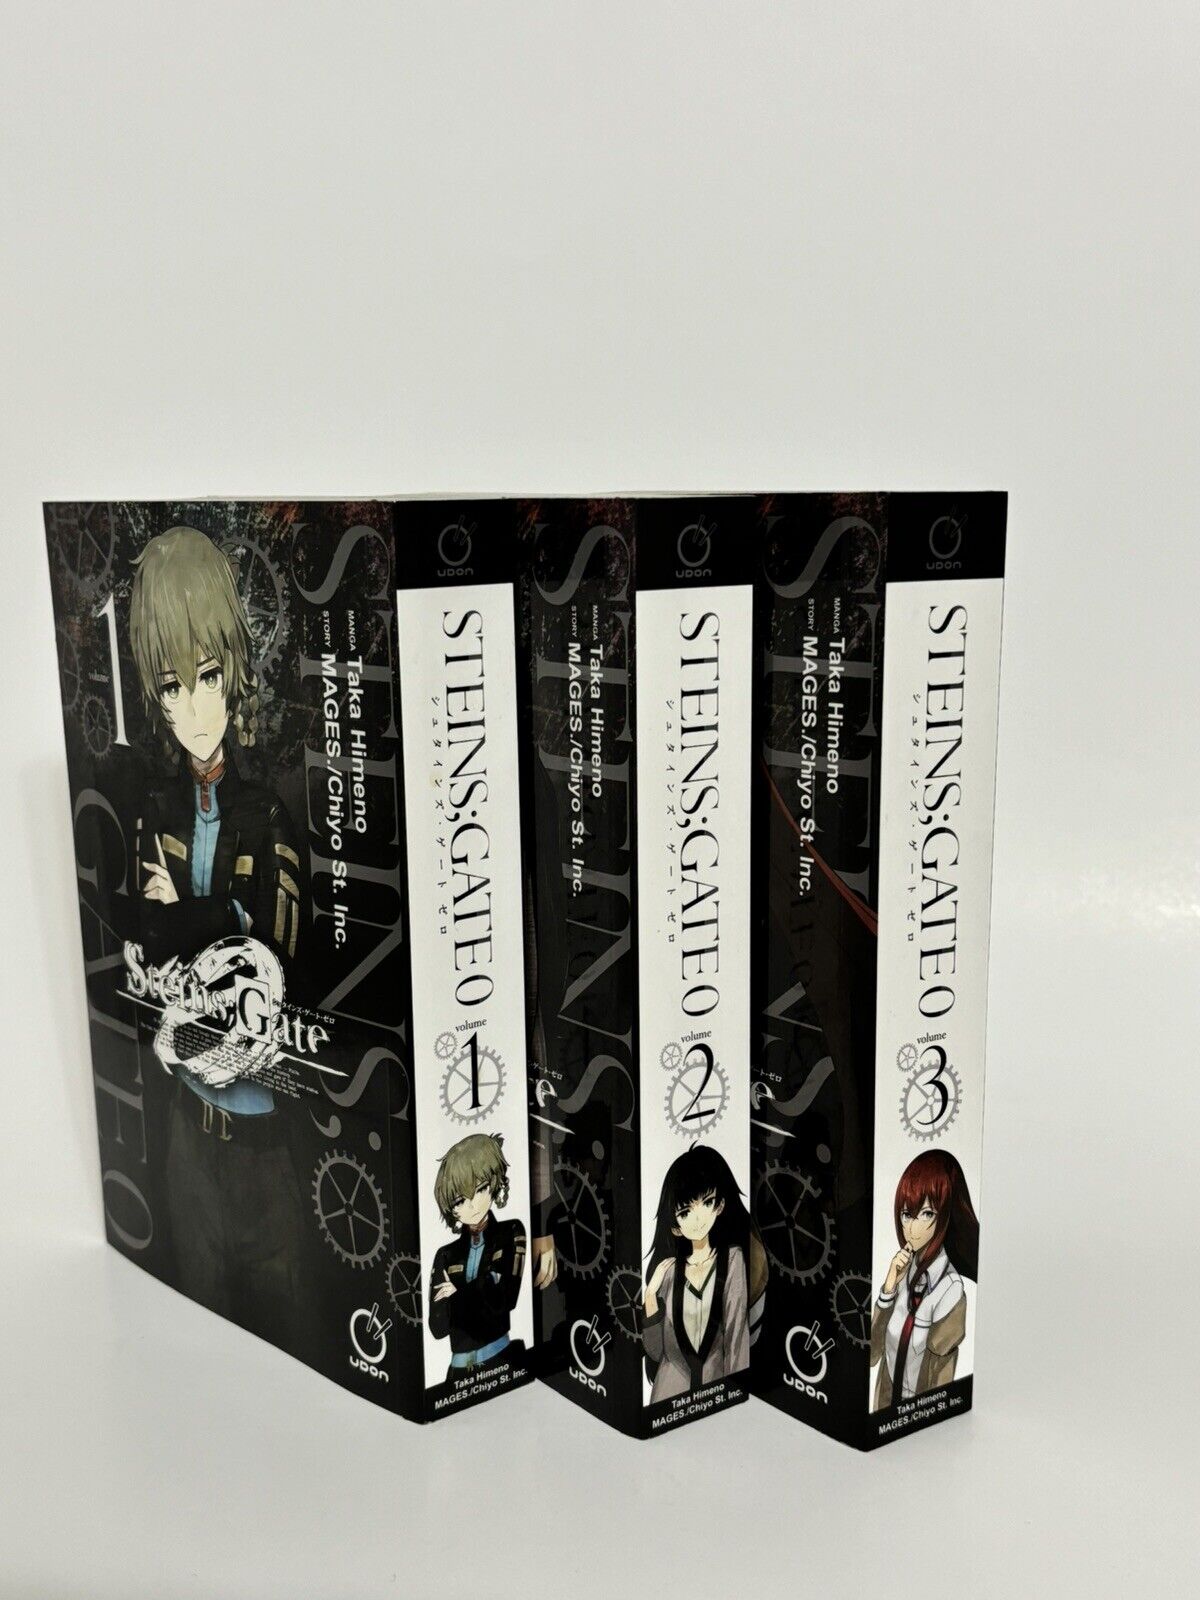 Steins;Gate 0 Manga Vol. 1-3 Barnes And Noble Exclusive + Poster Complete